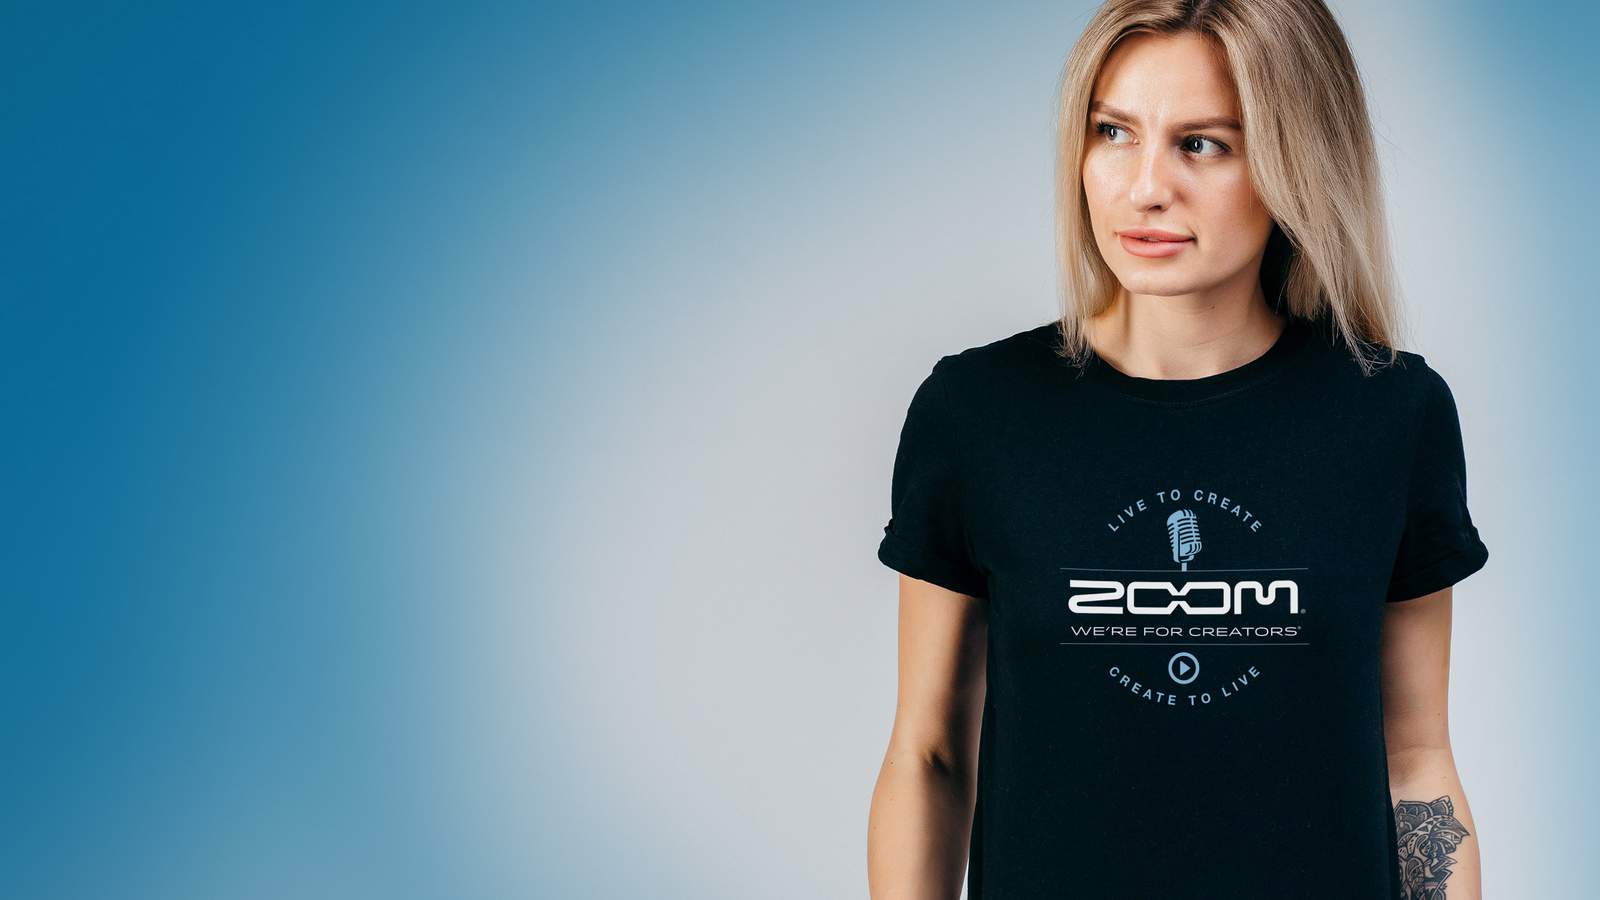 Young woman wearing the Zoom Live To Create t-shirt